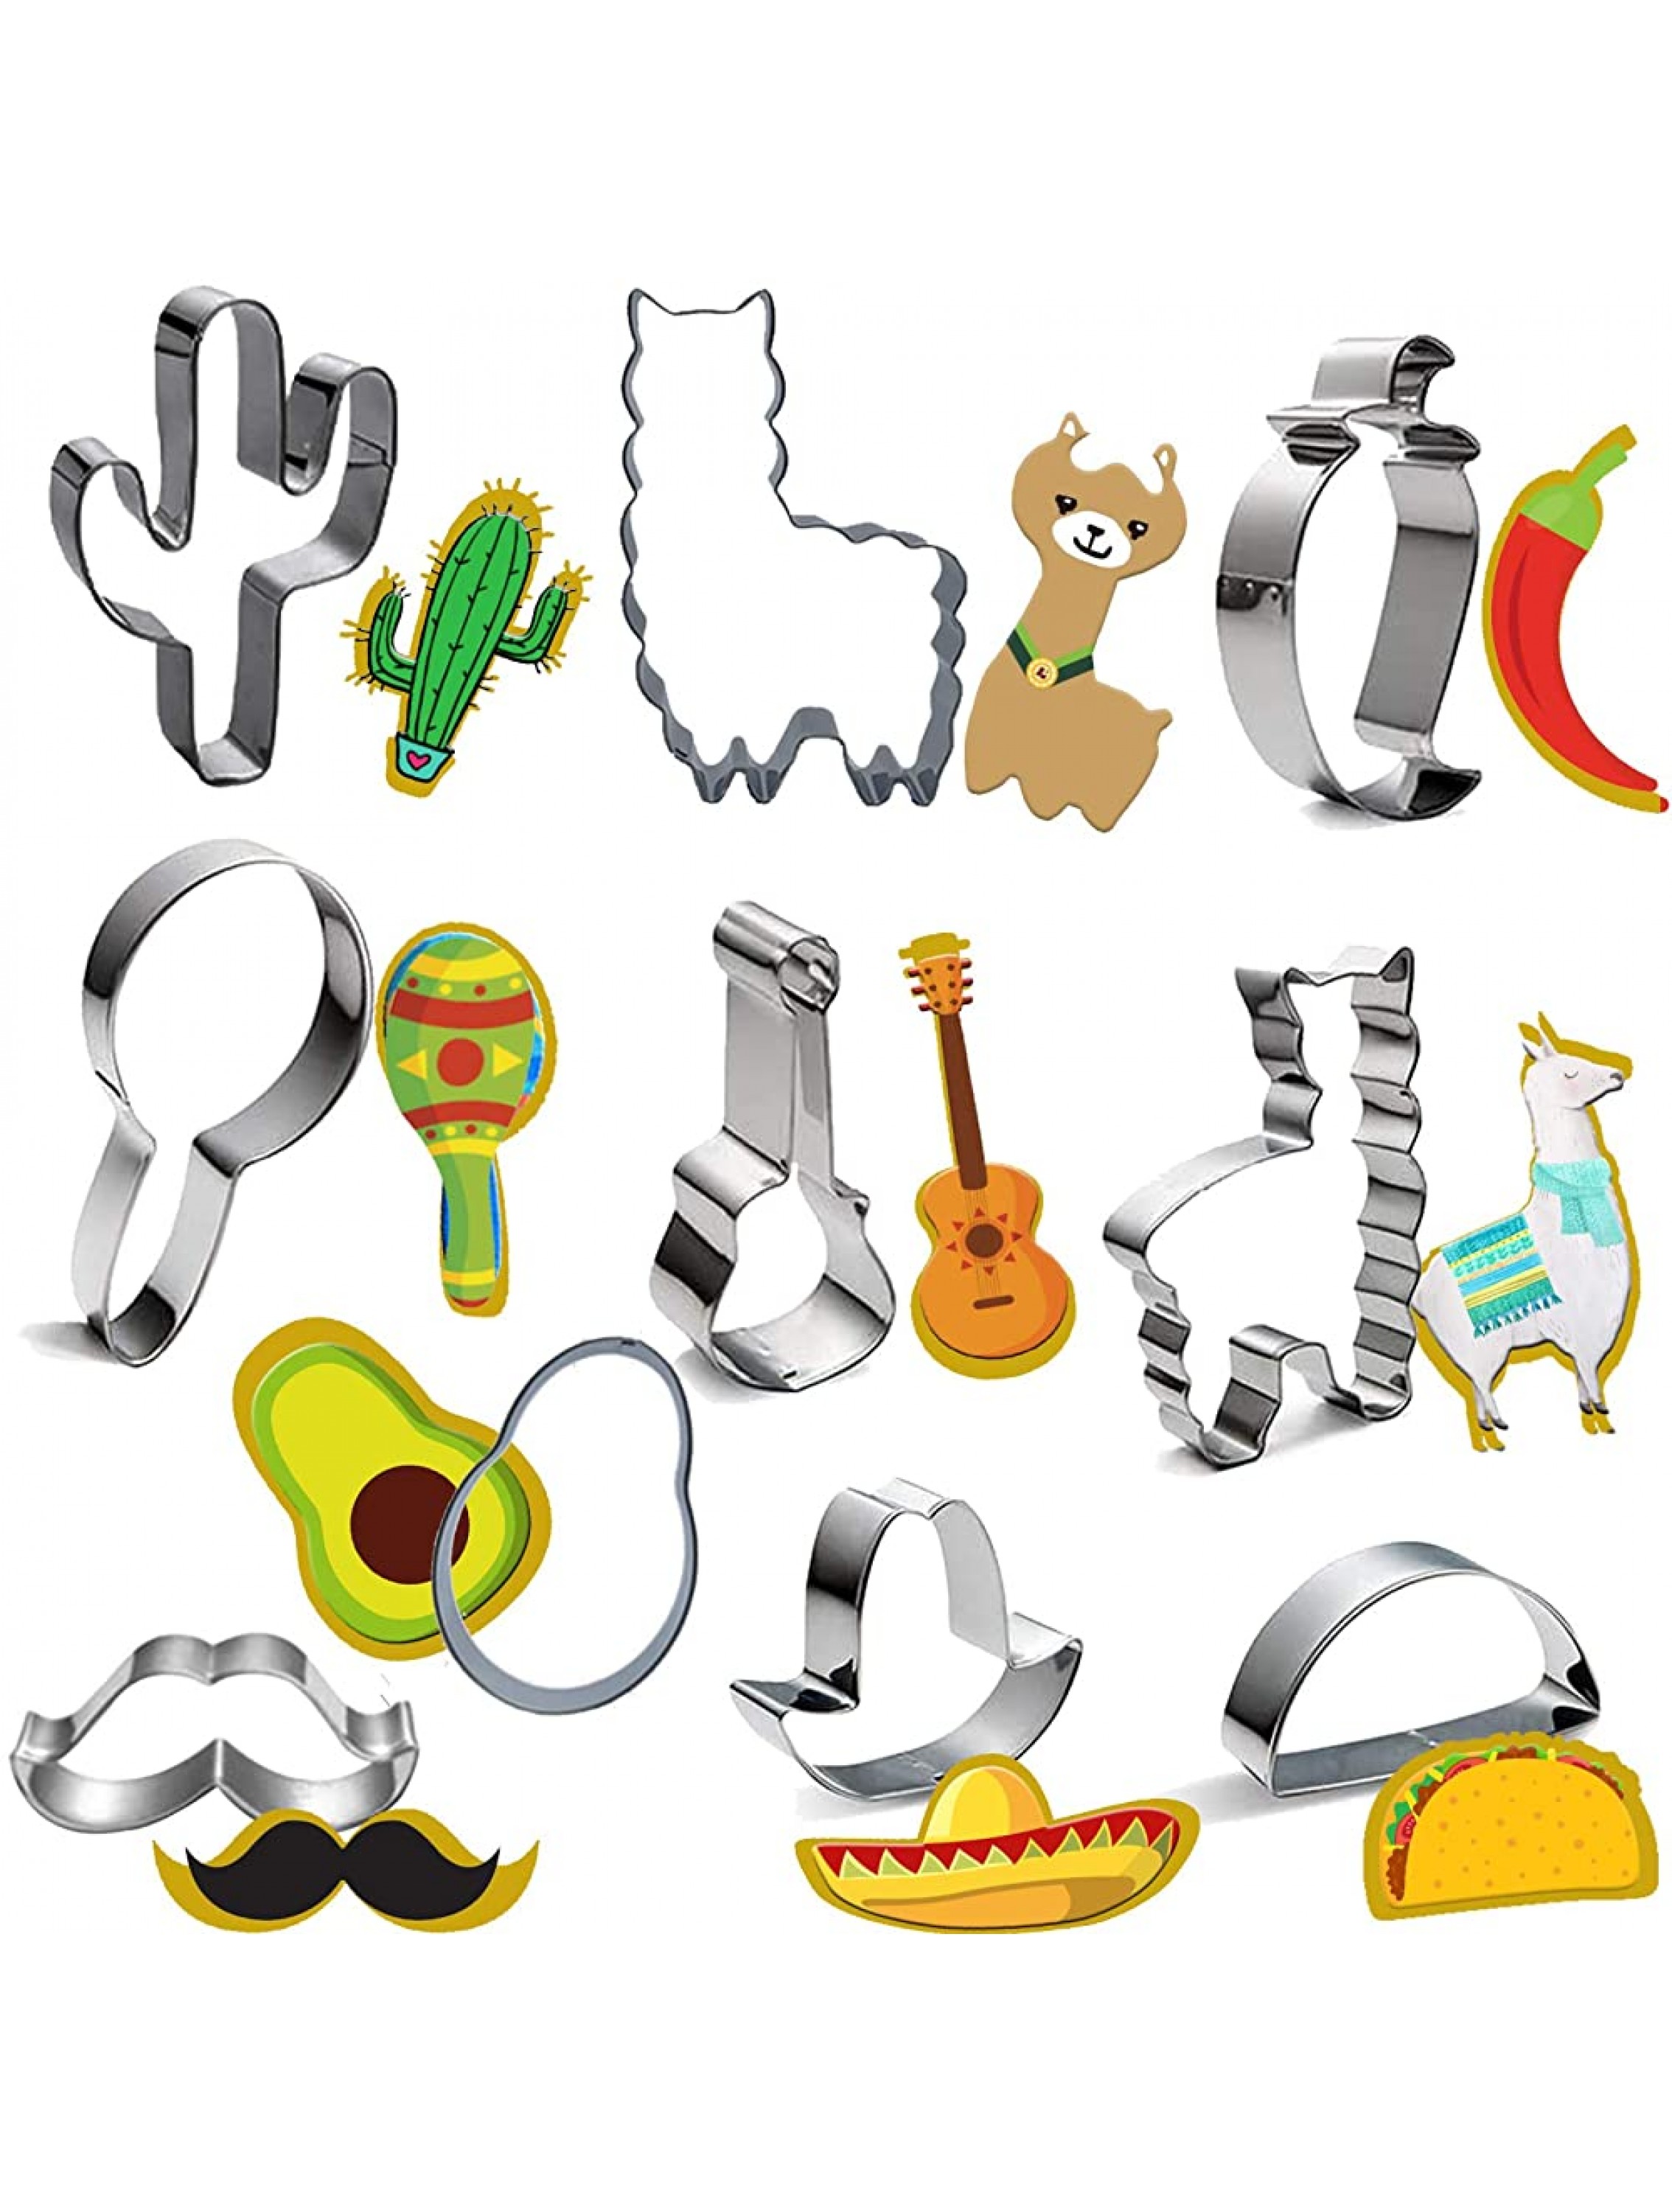 10pcs Mexican Fiesta Cookie Cutter Set Stainless Steel Cinco De Mayo Mexican Festival Cookie Molds Alpaca Cactus Hat Guitar For Baking Decorative Food DIY Supplies - BCGP9FQQN